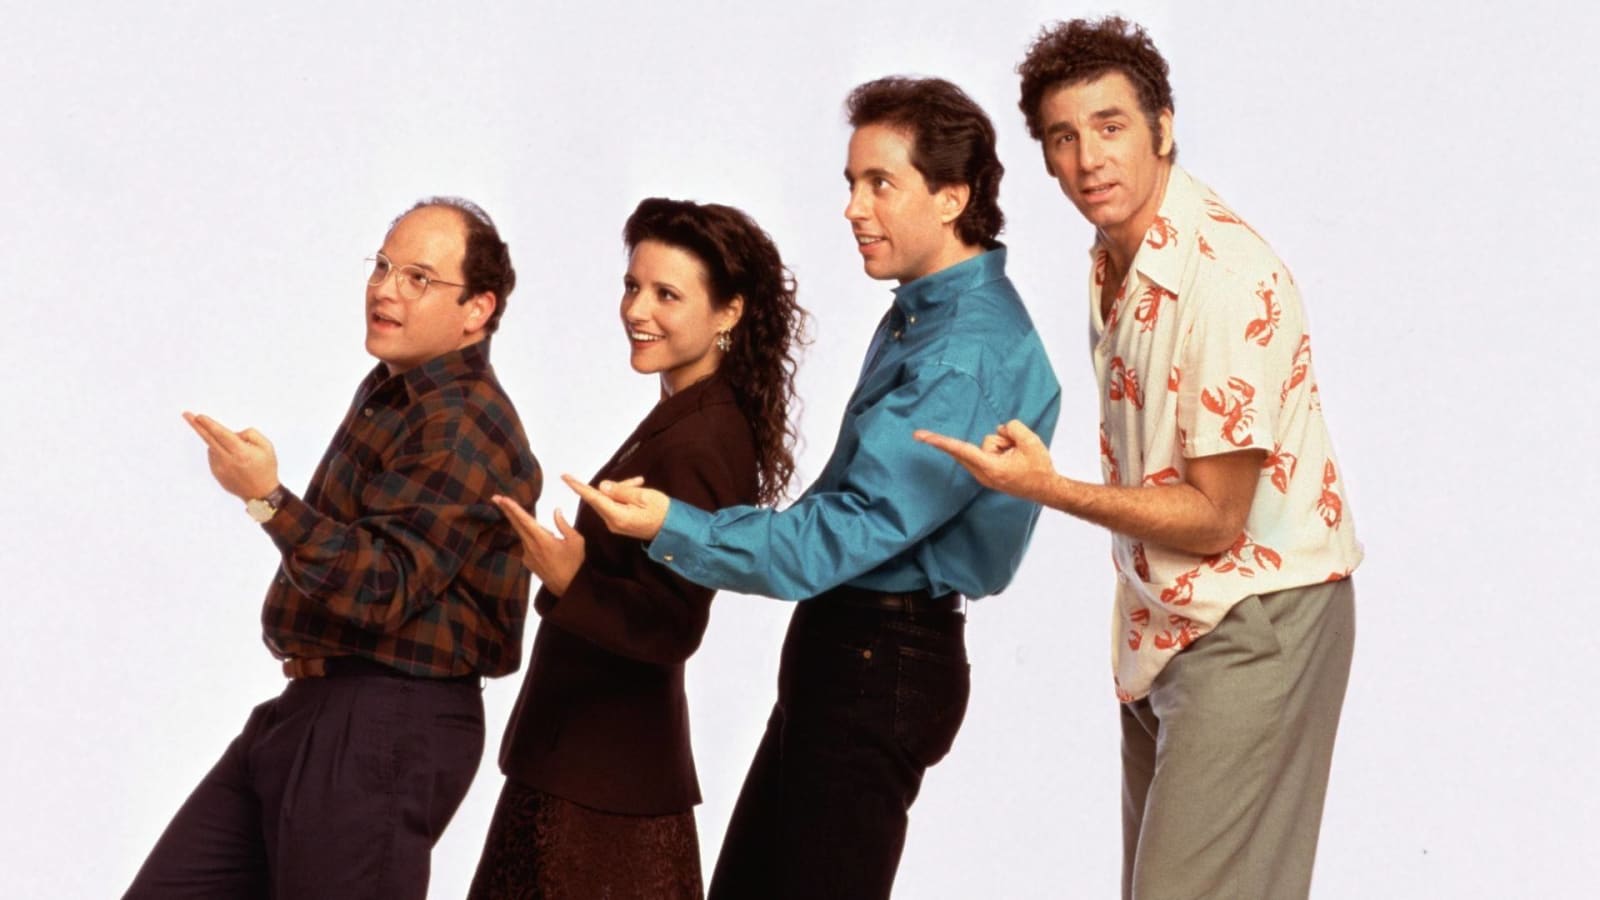 Our 30 favorite 'Seinfeld' episodes